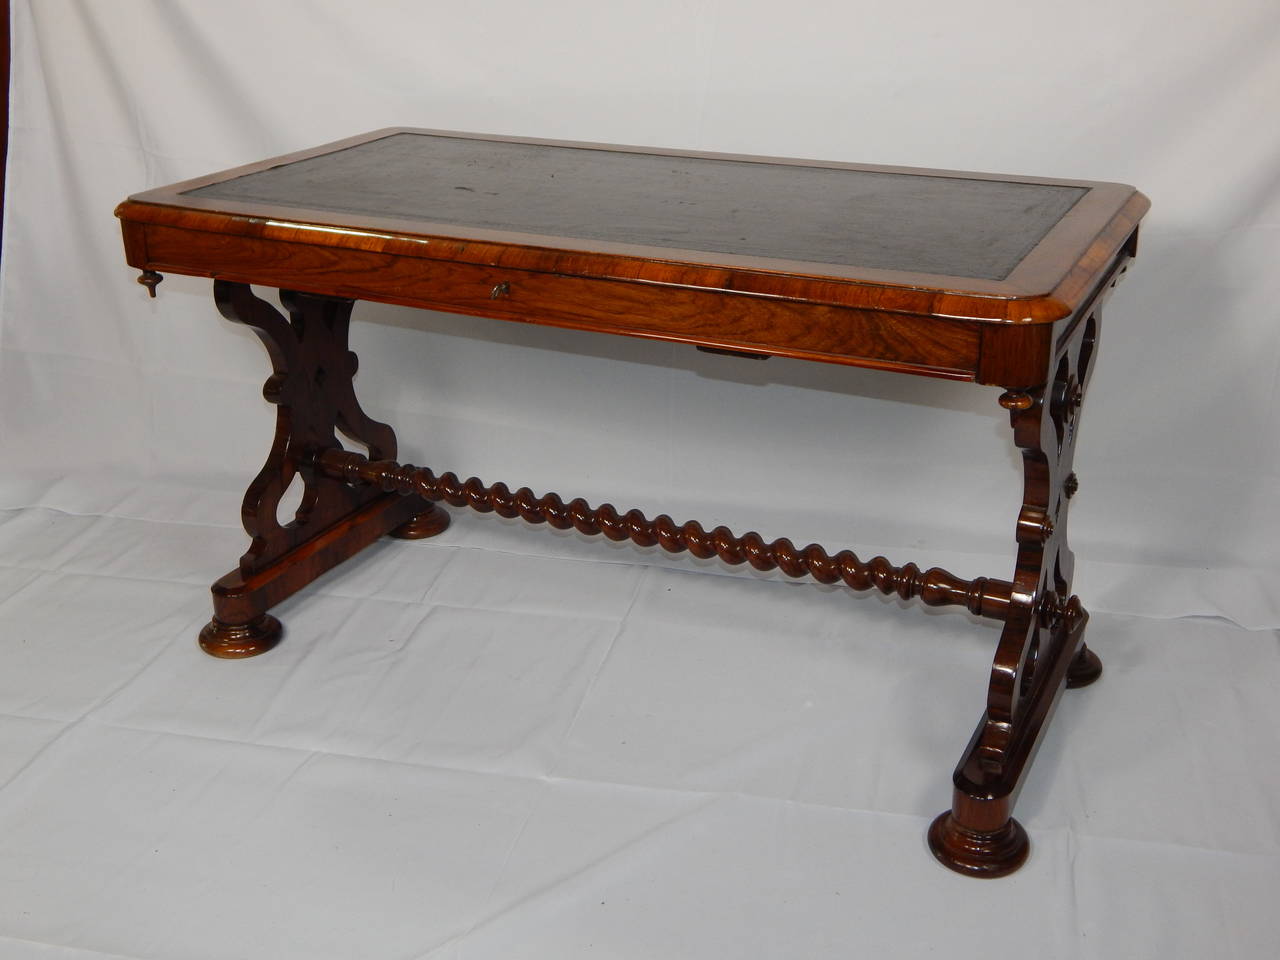 Mahogany and Rosewood writing table with inset leather top,
with a spool stretcher. One center drawer, with the lock stamped
Hobson & Co. London.